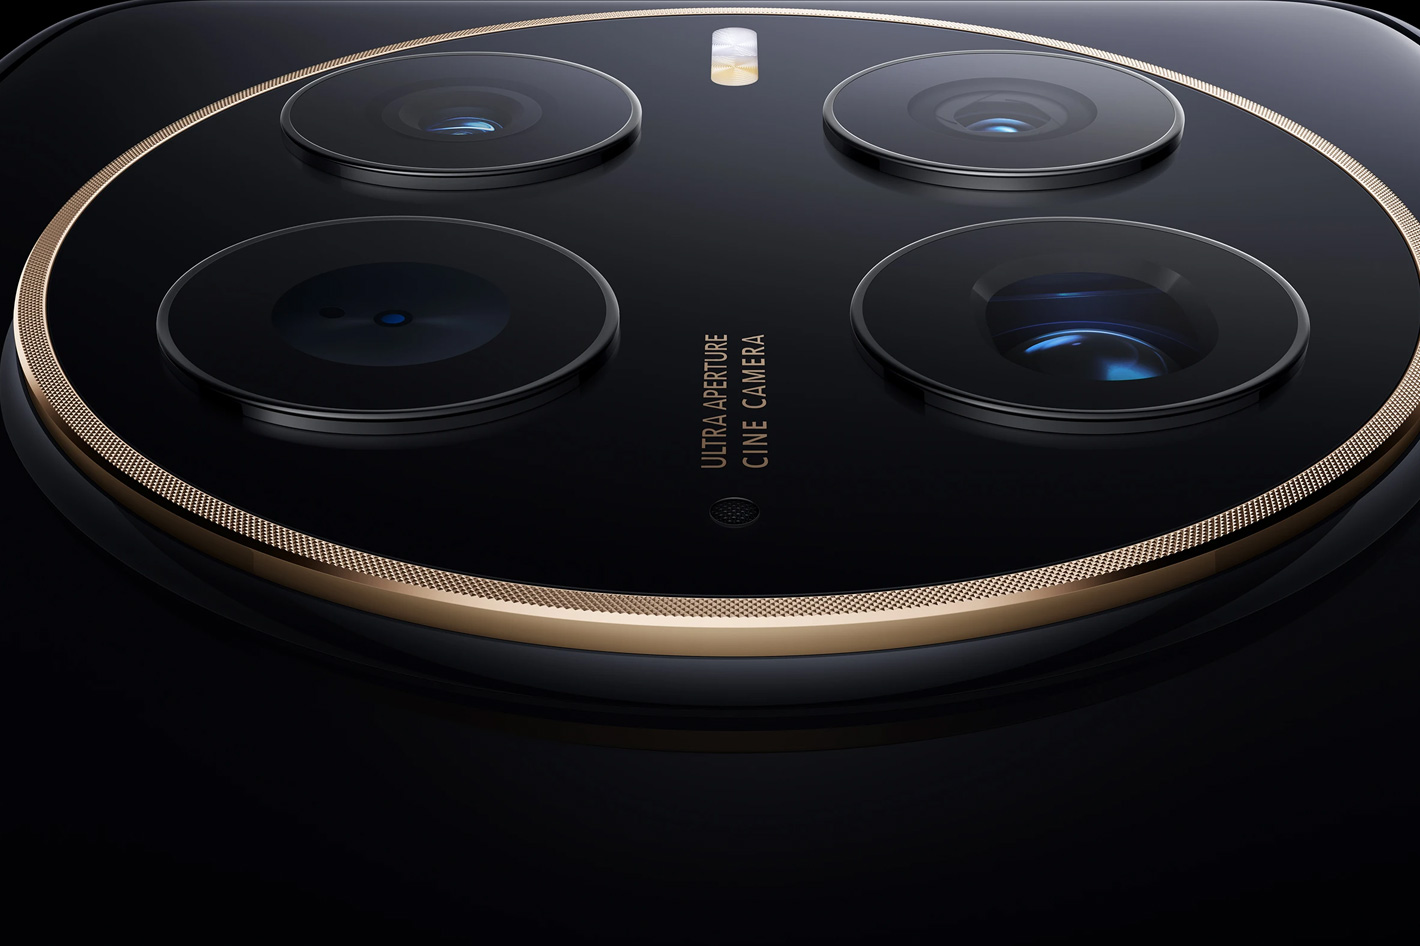 HUAWEI Mate 50 Pro has a camera lens with variable aperture